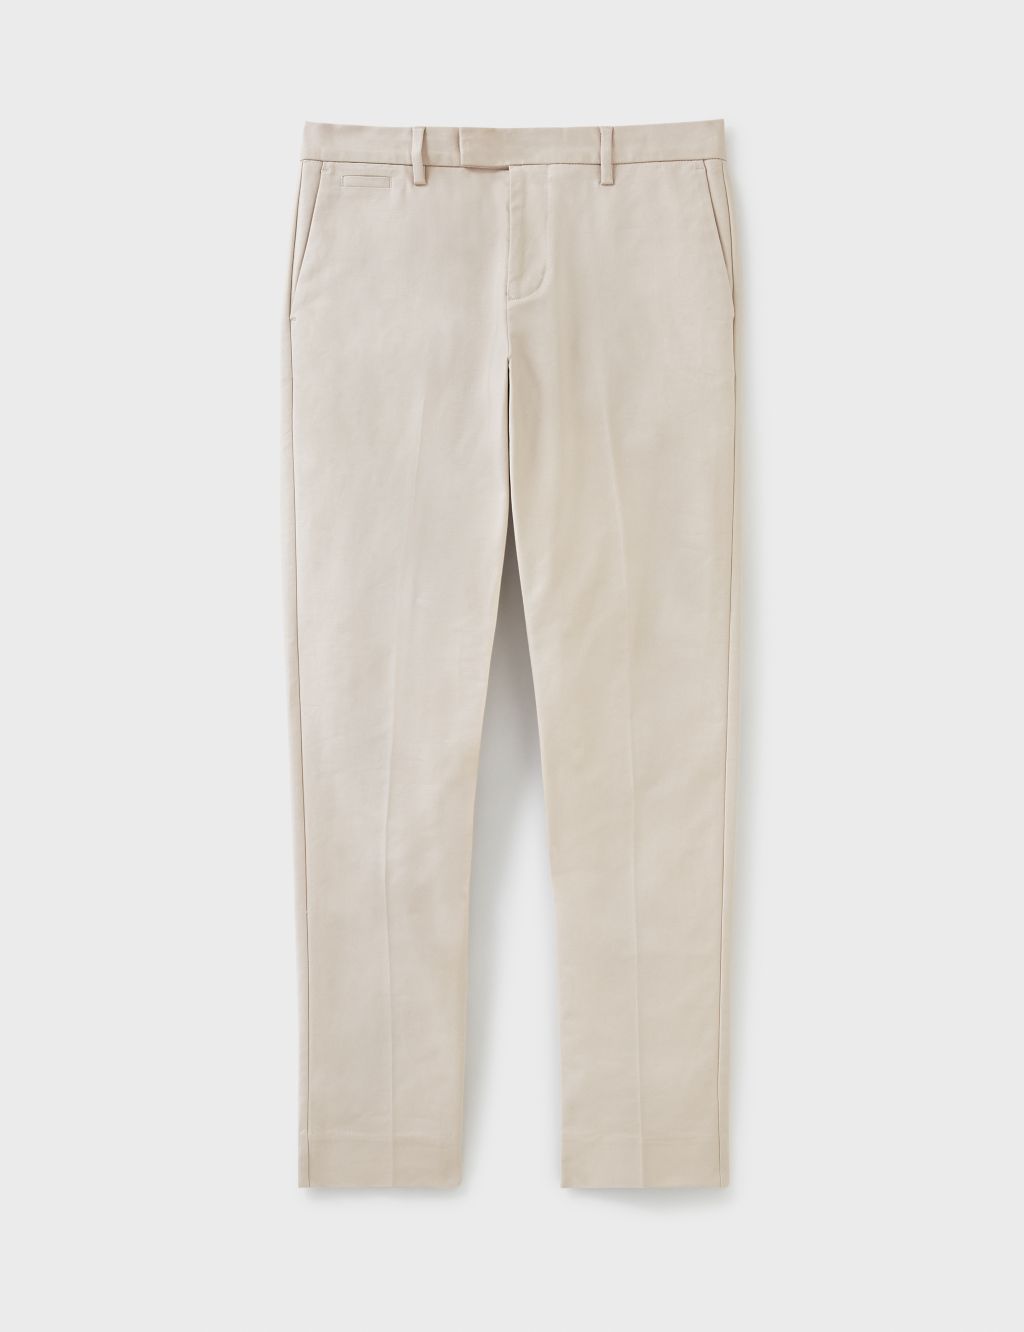 Tailored Fit Cotton Rich Stretch Trousers image 2